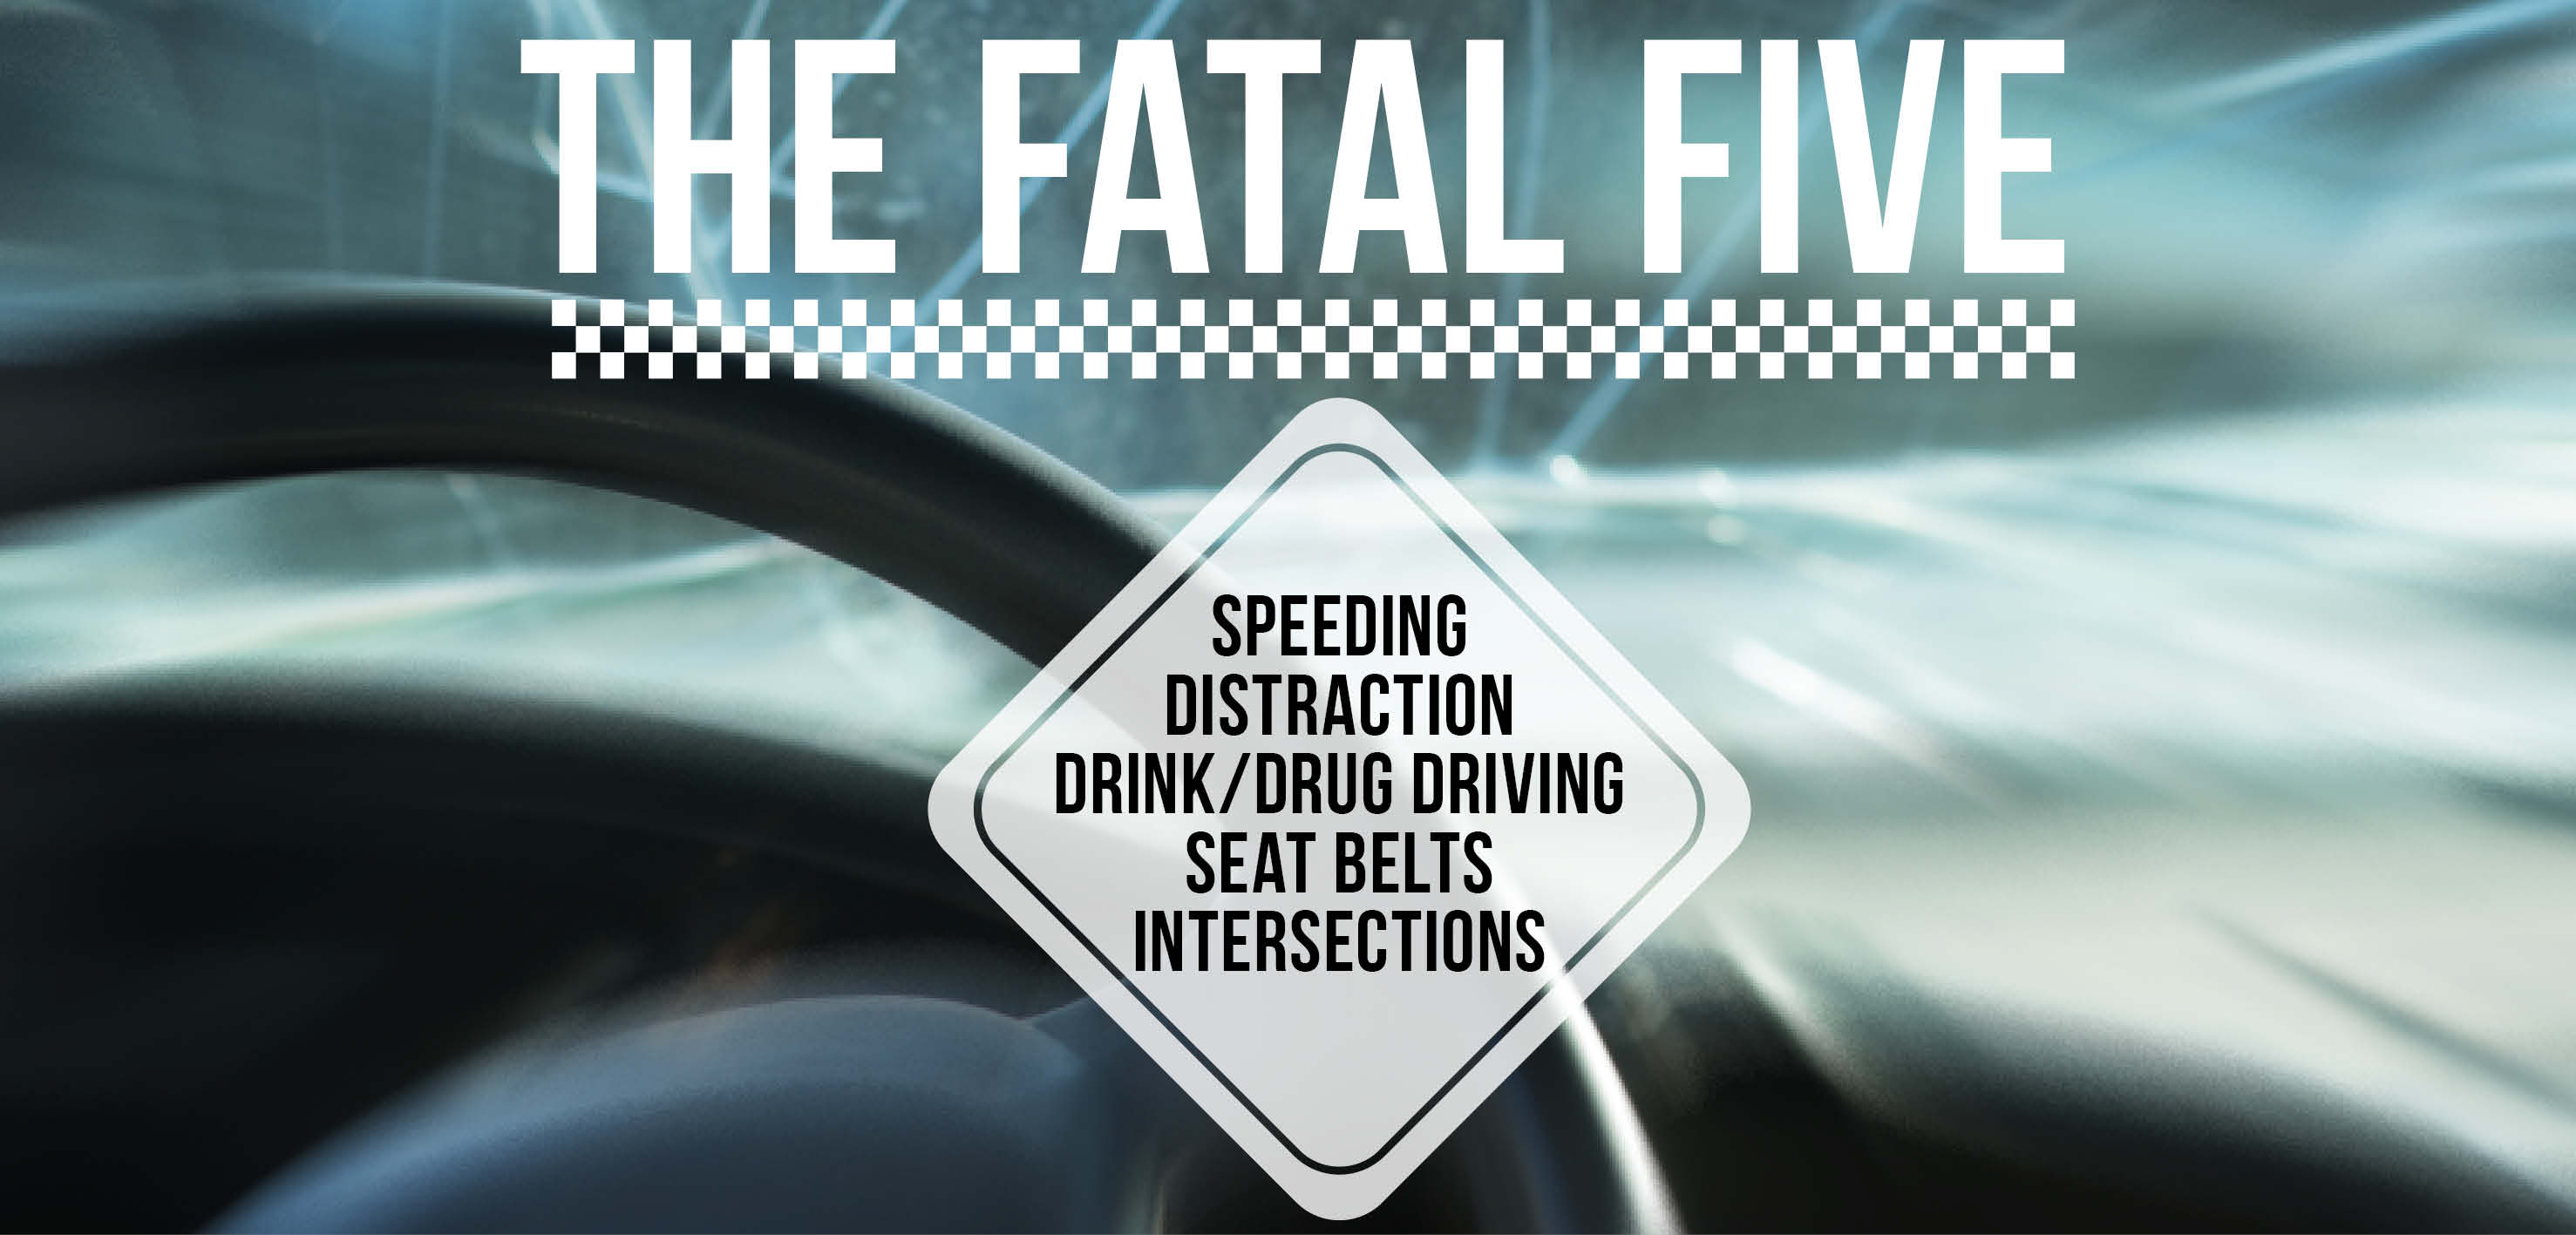 Banner stating Fatal Five: impaired driving, seatbelts, speeding, intersections and driver distraction